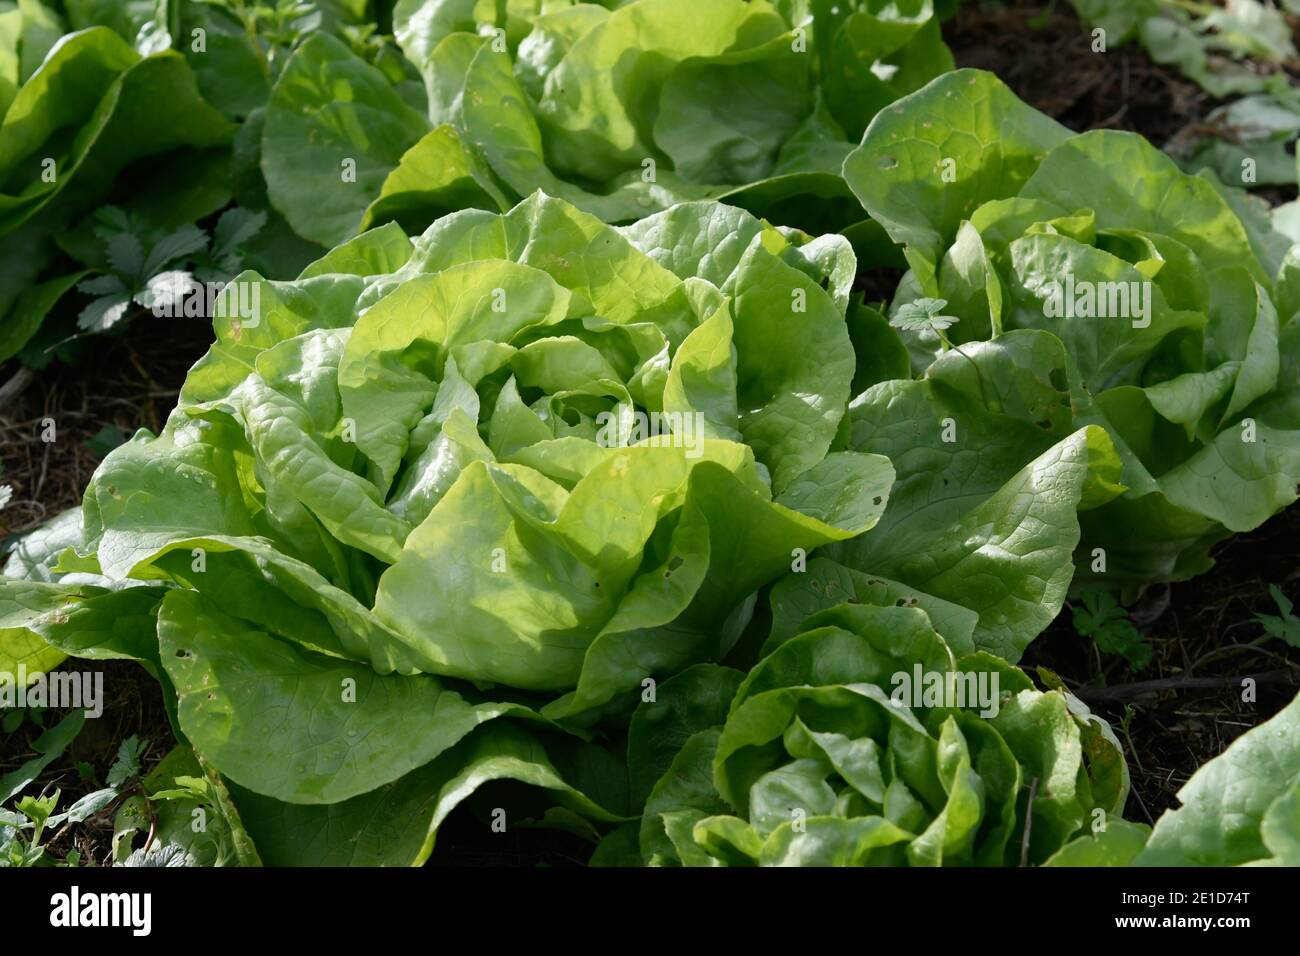 Closeup of a lettuce plant of the trocadero variety Stock Photo